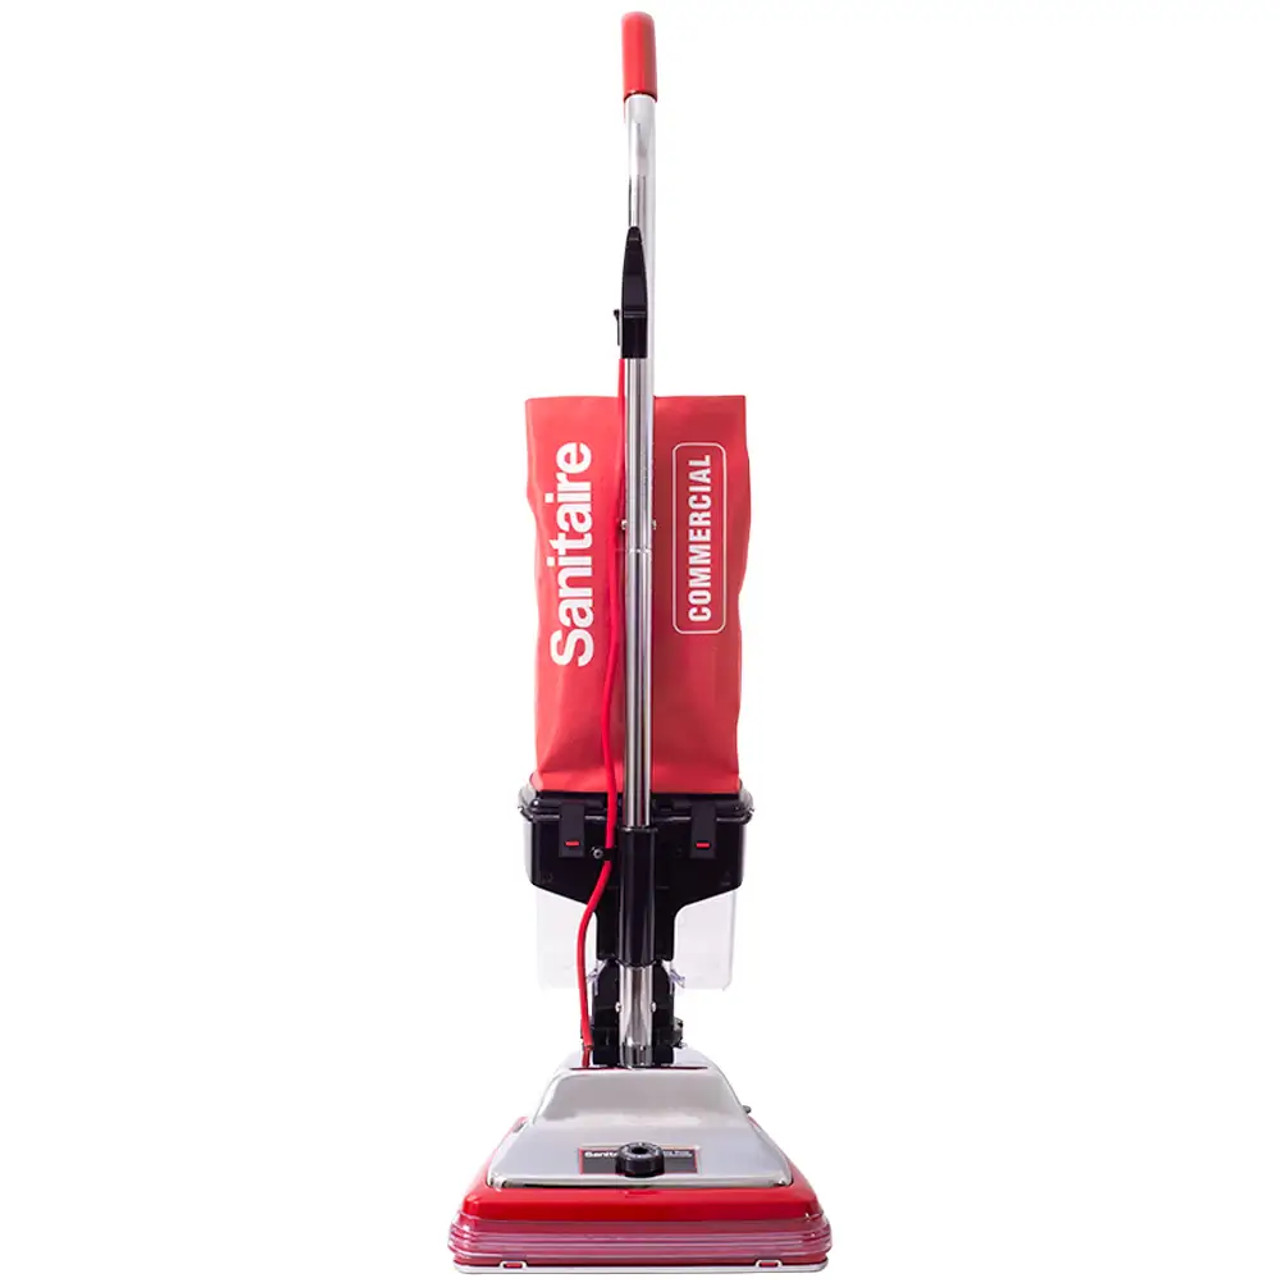 Sanitaire TRADITION 12" Upright Vacuum Cleaner with Dirt Cup - 840W | Efficient Cleaning with Easy Maintenance